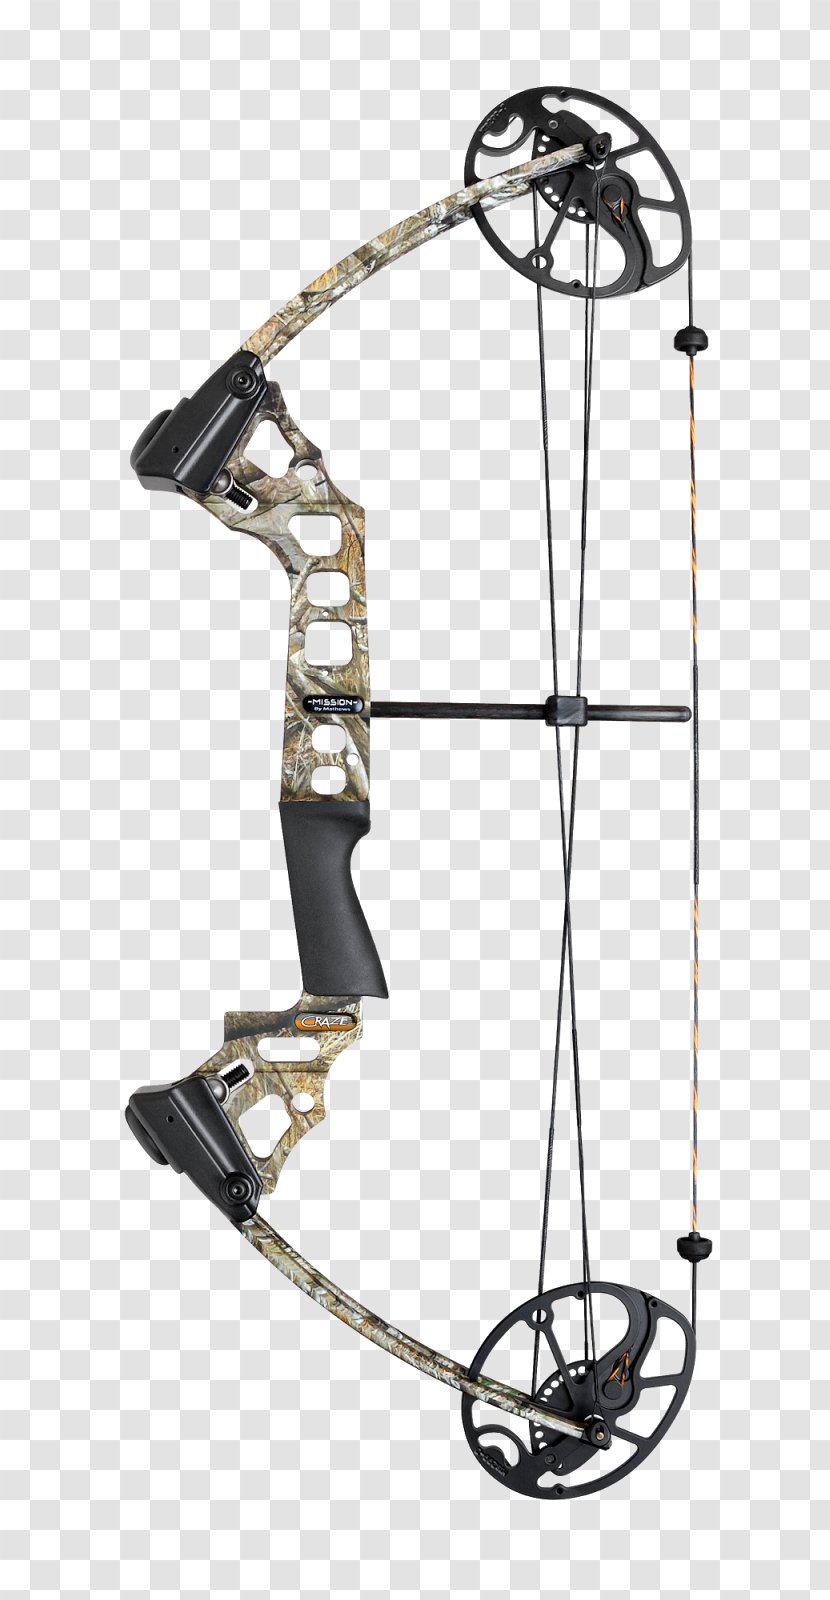 Compound Bows Bowhunting Bow And Arrow Archery - Crossbow - Bowstring Transparent PNG